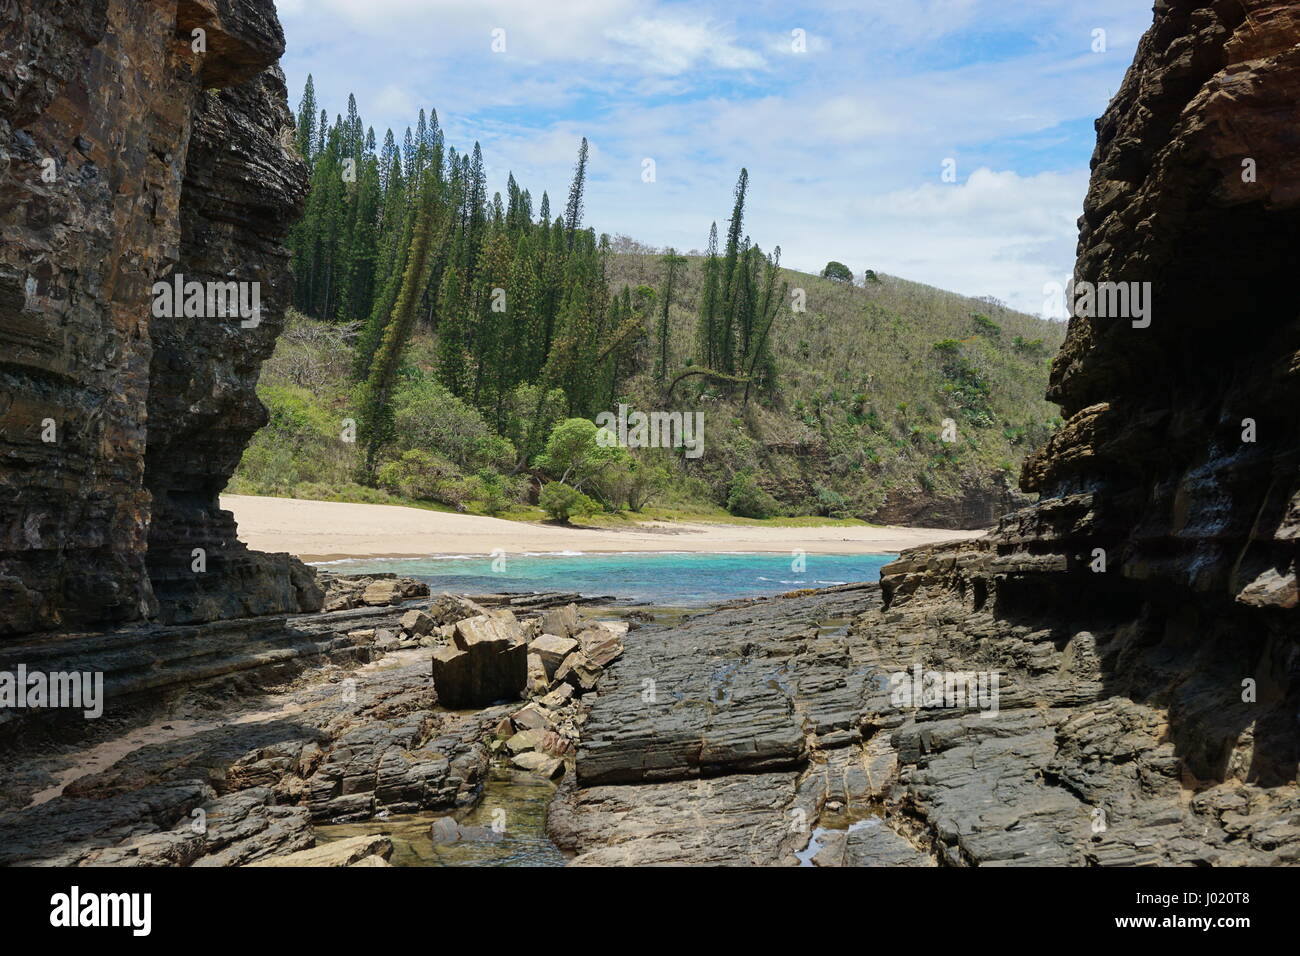 Coastal landscape in New Caledonia, beach, rocks and endemic pines in Turtle bay, Bourail, Grande Terre island, south Pacific Stock Photo